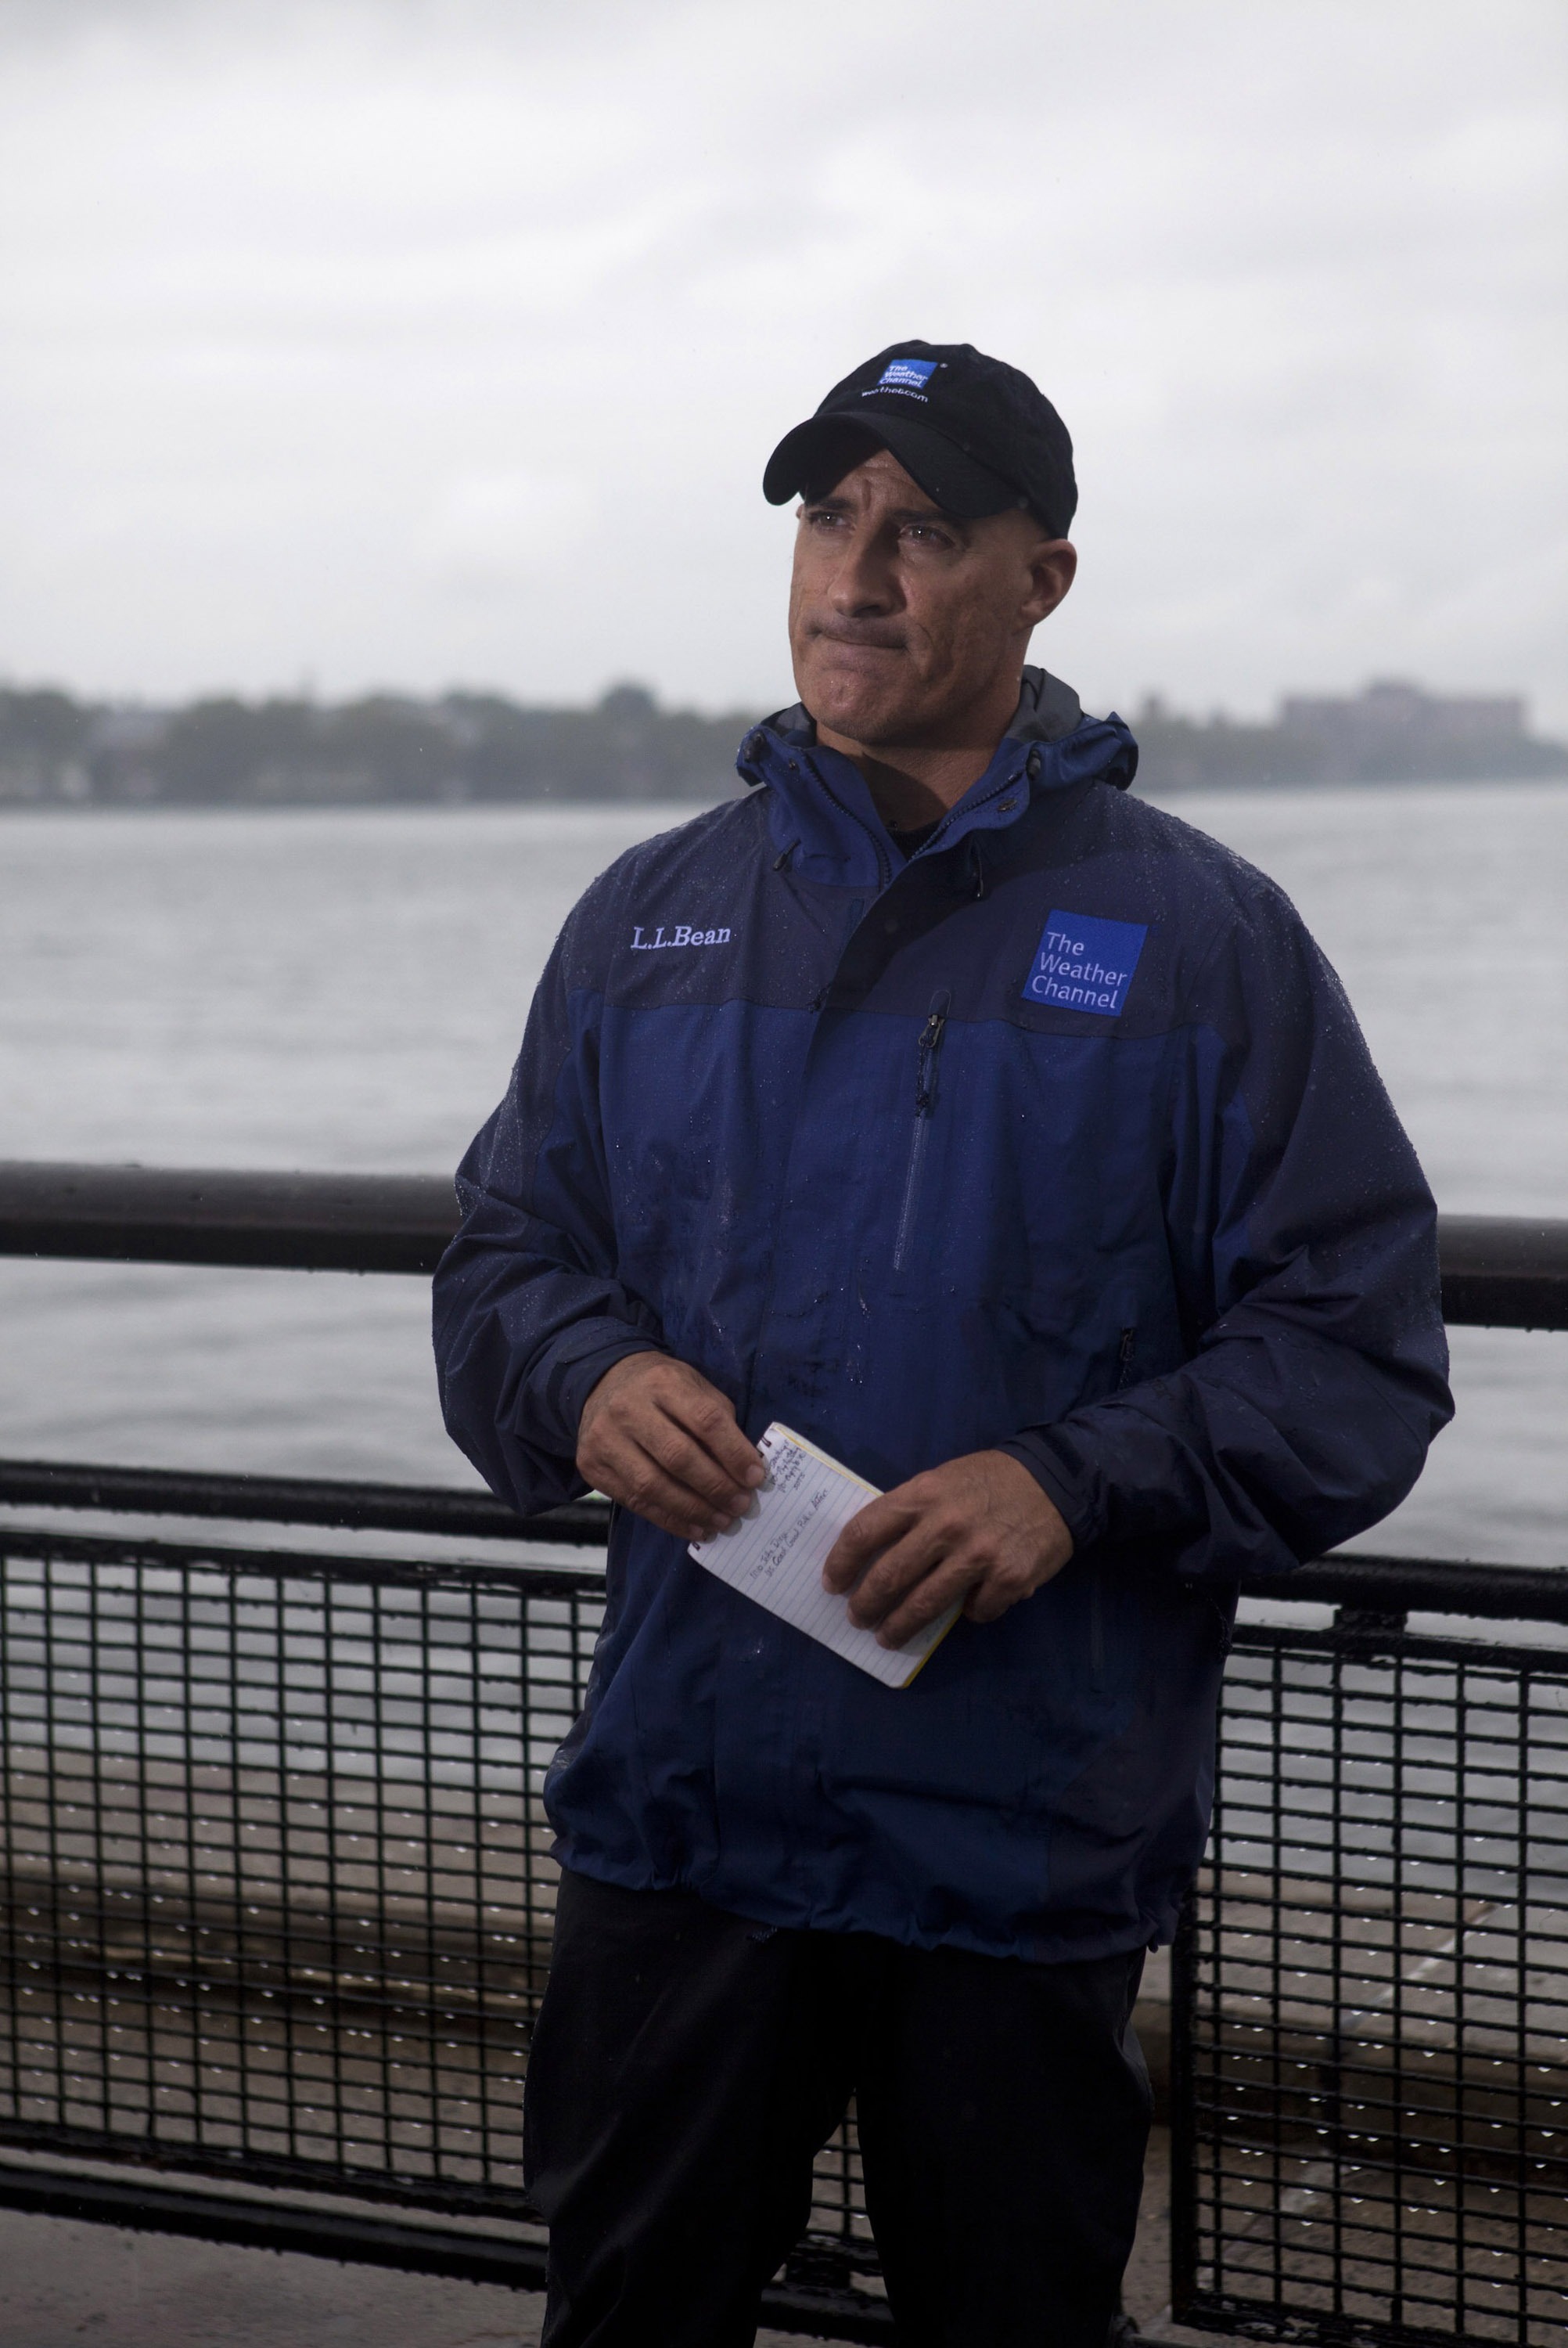 Weather Channel's Jim Cantore in Nashville covering storm